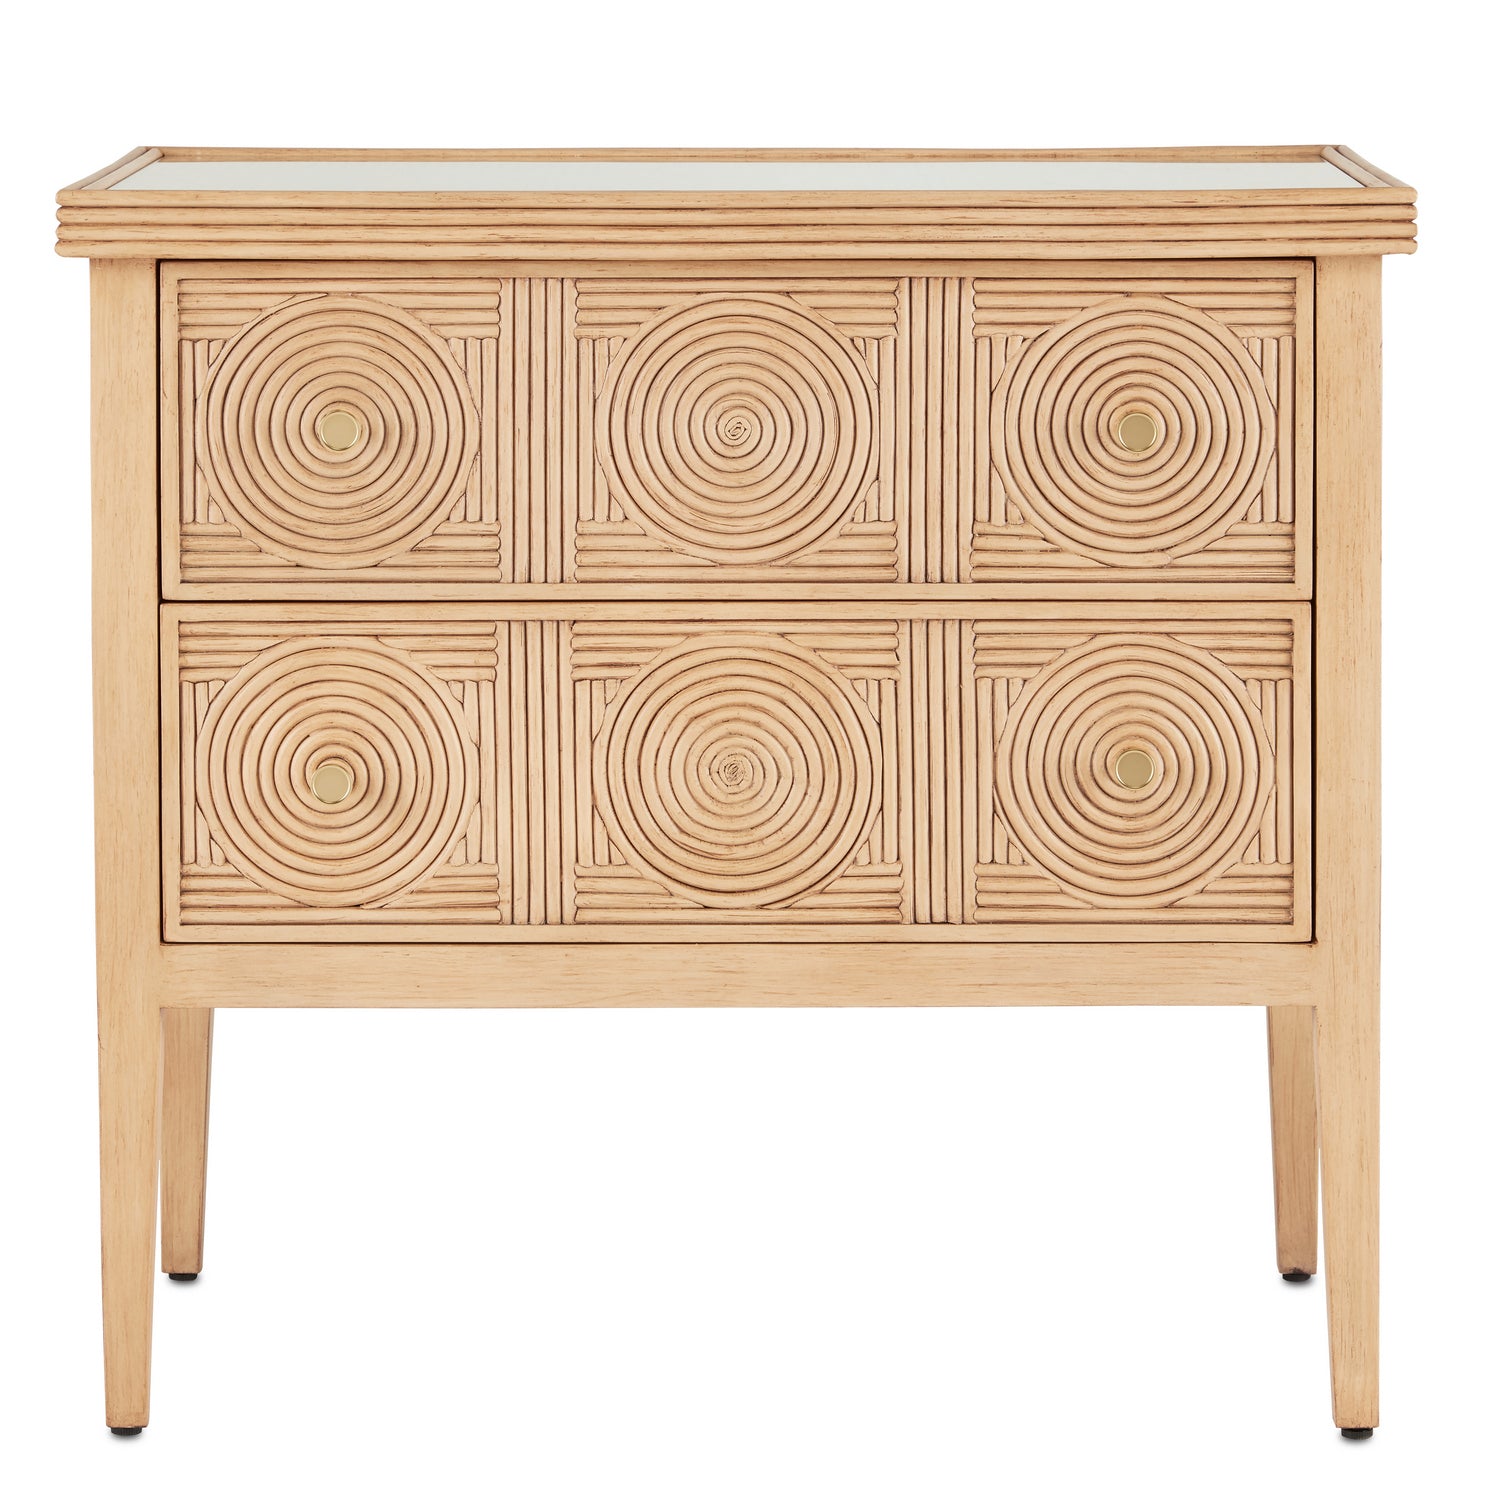 Chest from the Santos collection in Sea Sand/Brushed Brass finish